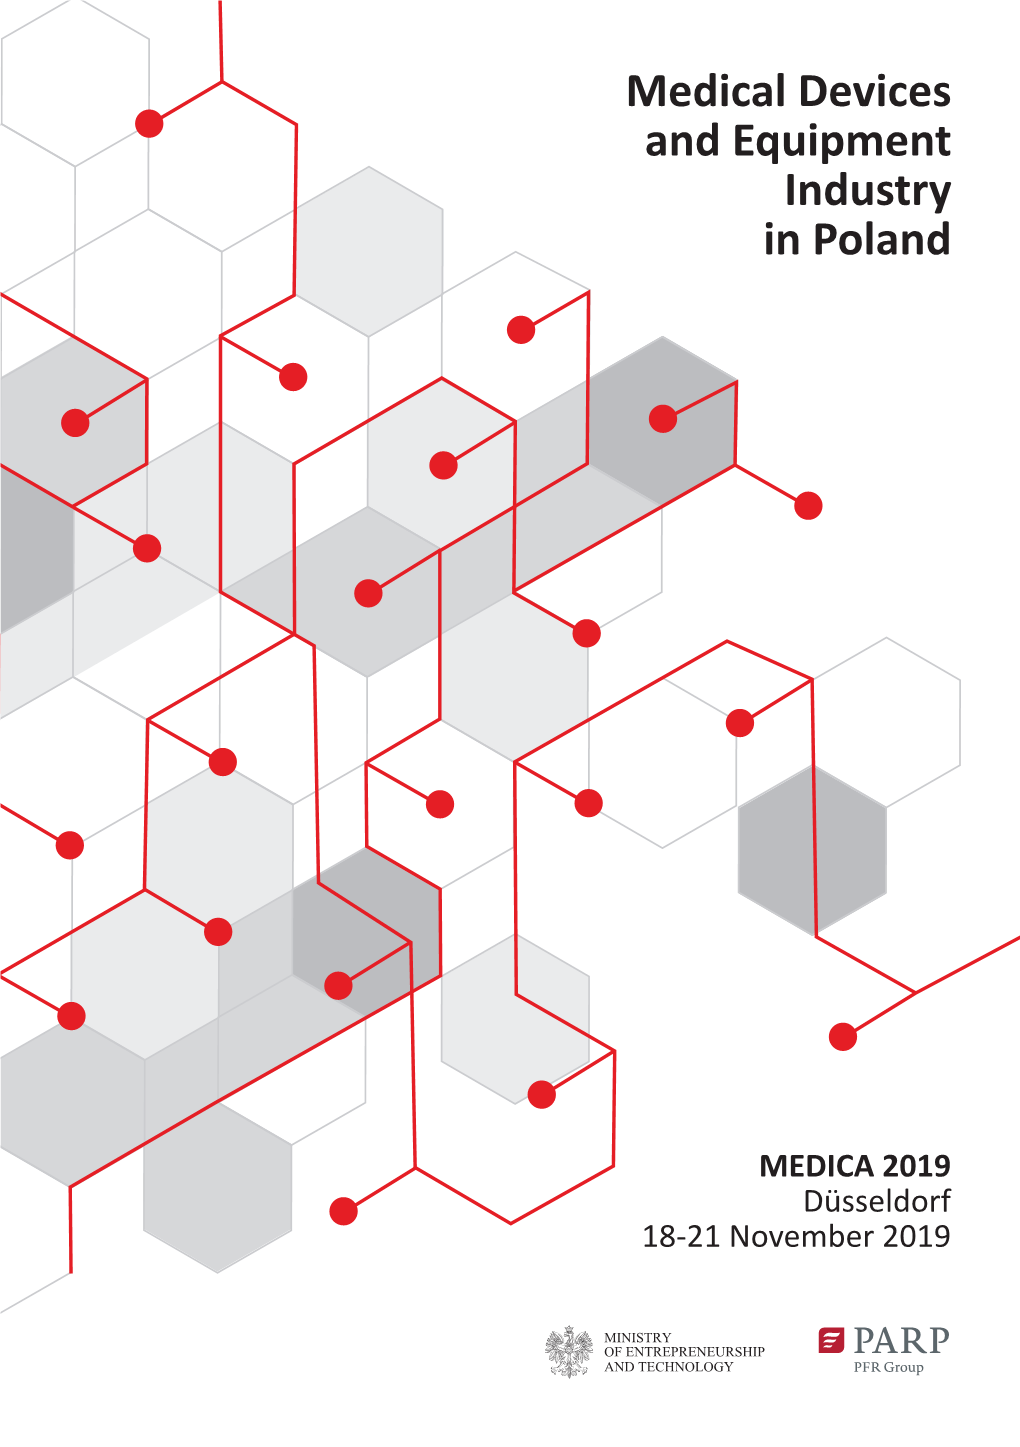 Medical Devices and Equipment Industry in Poland